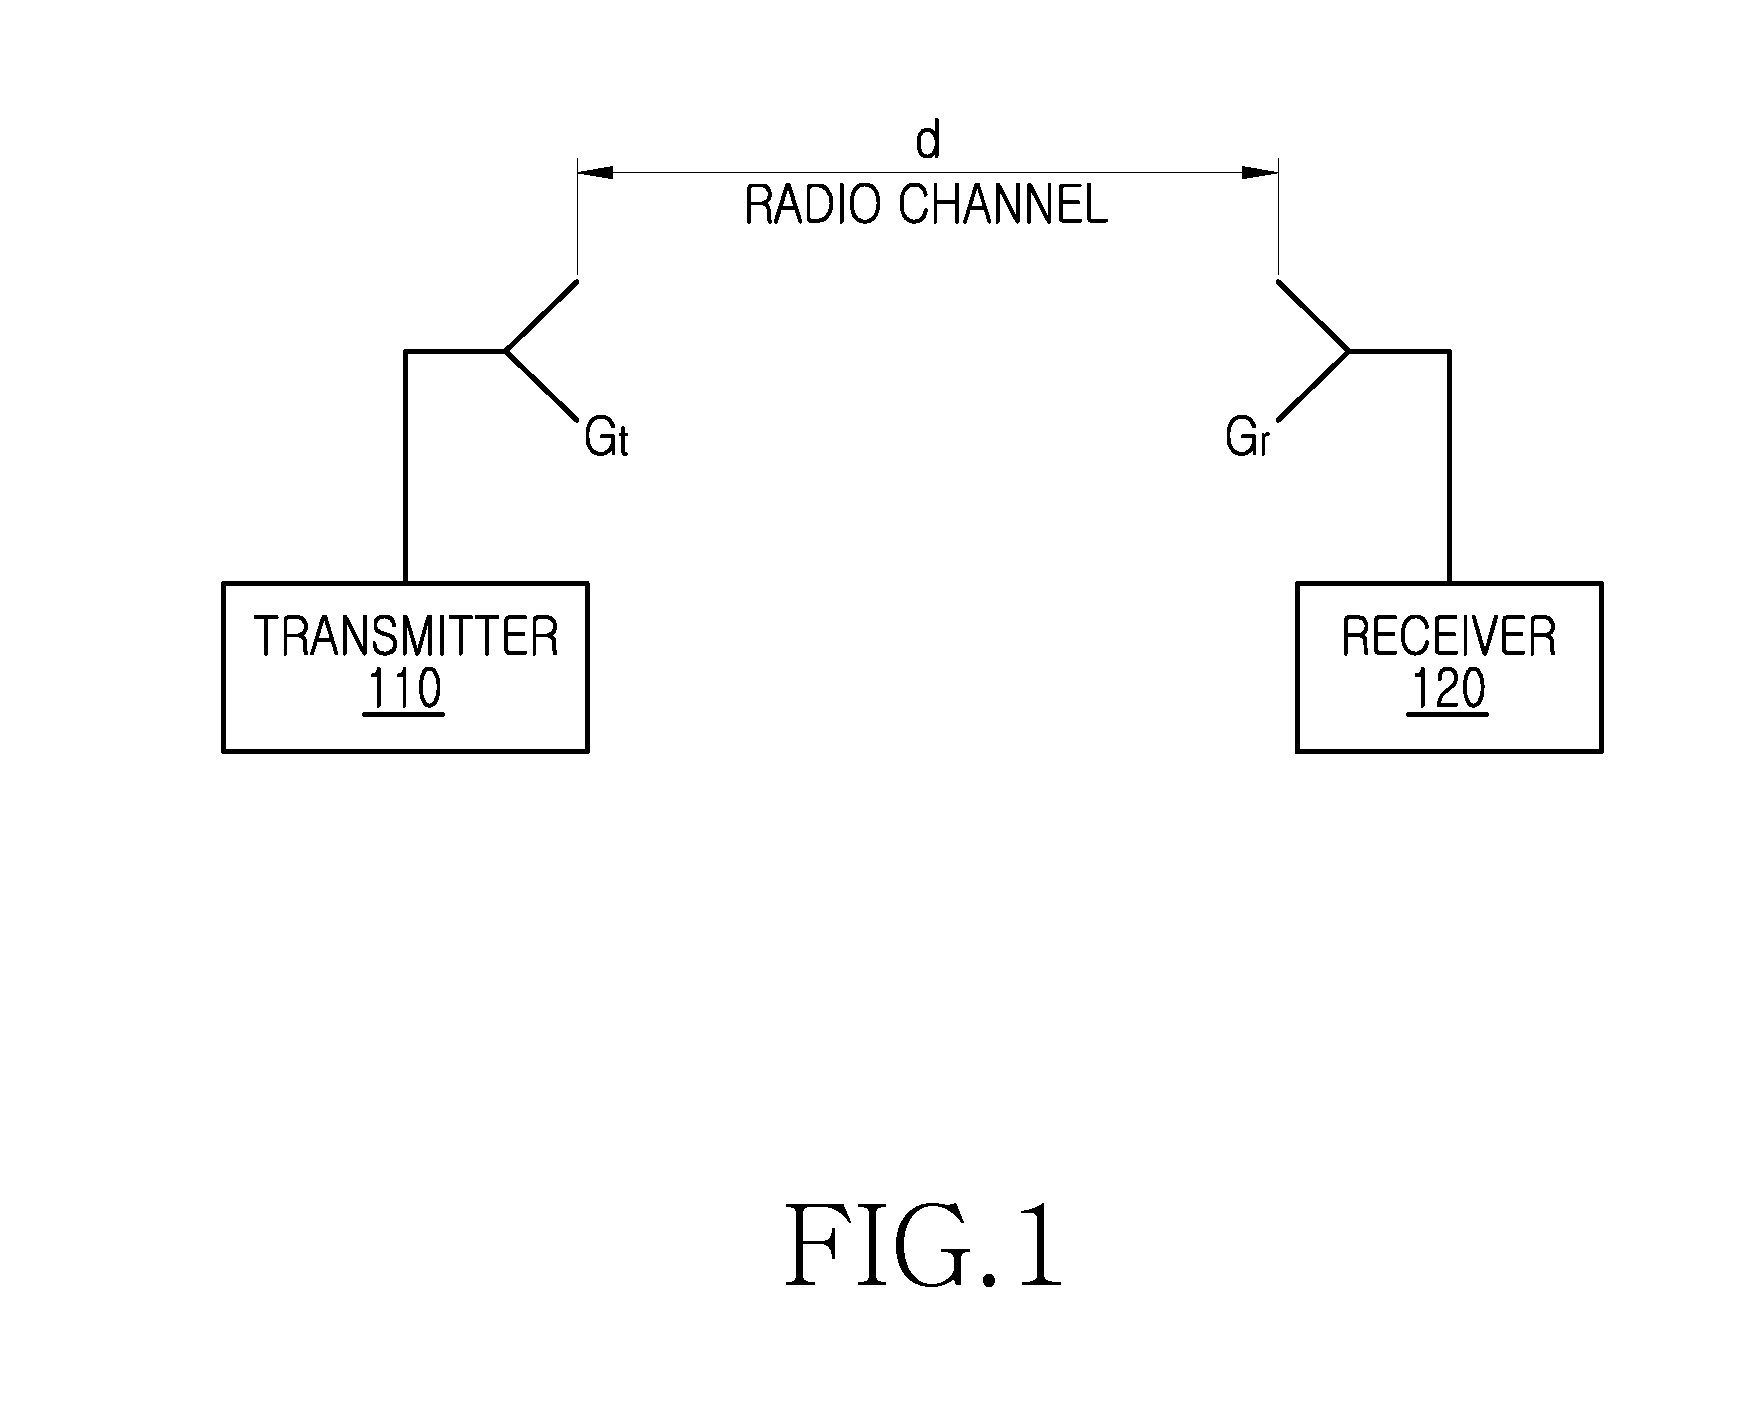 Apparatus and method for beam locking in wireless communication system